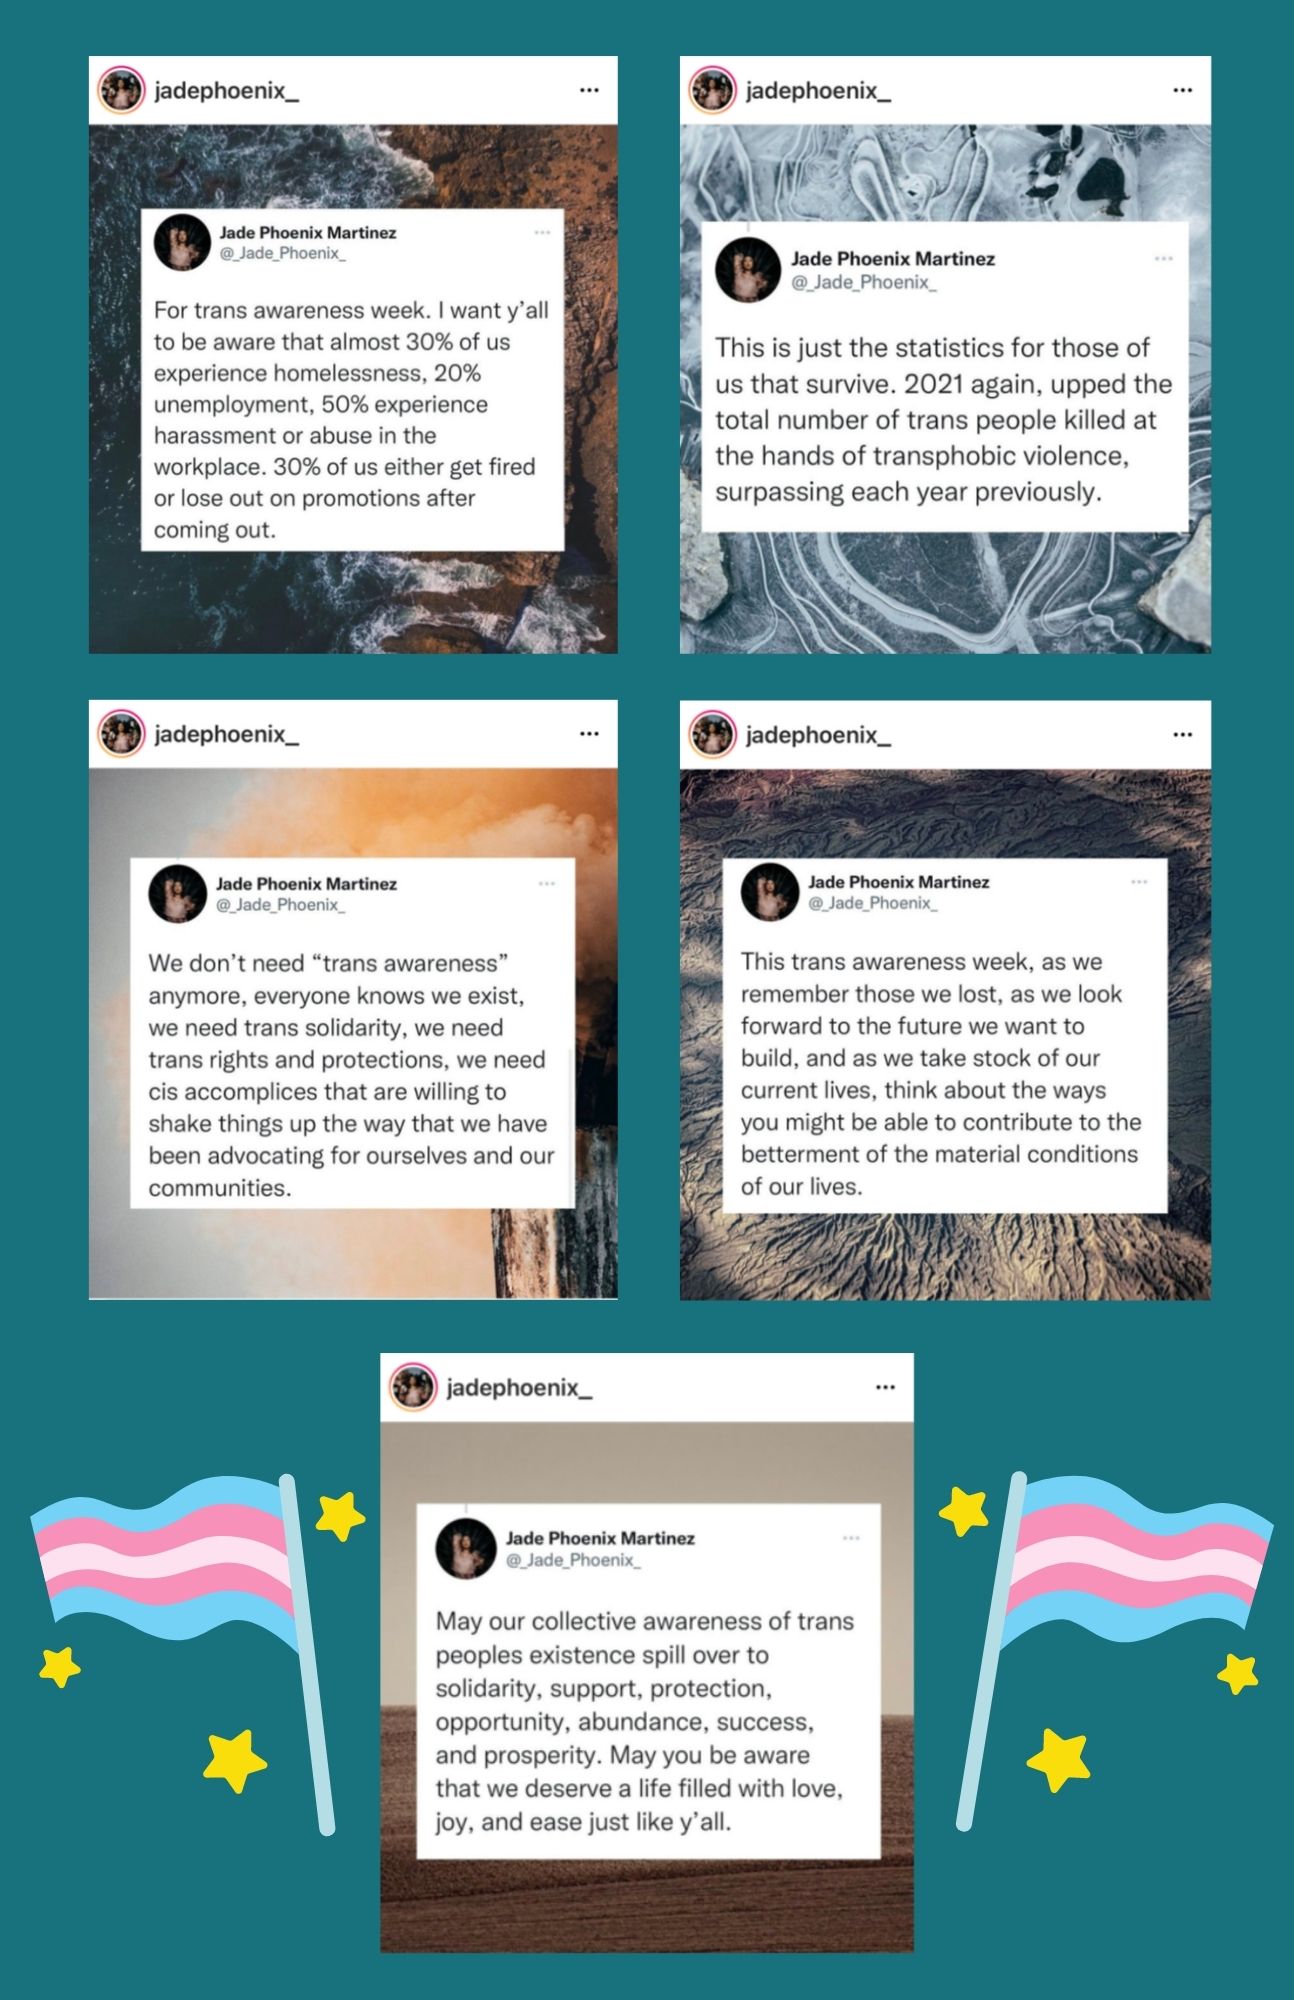 A series of tweets advocating for trans rights and equality.